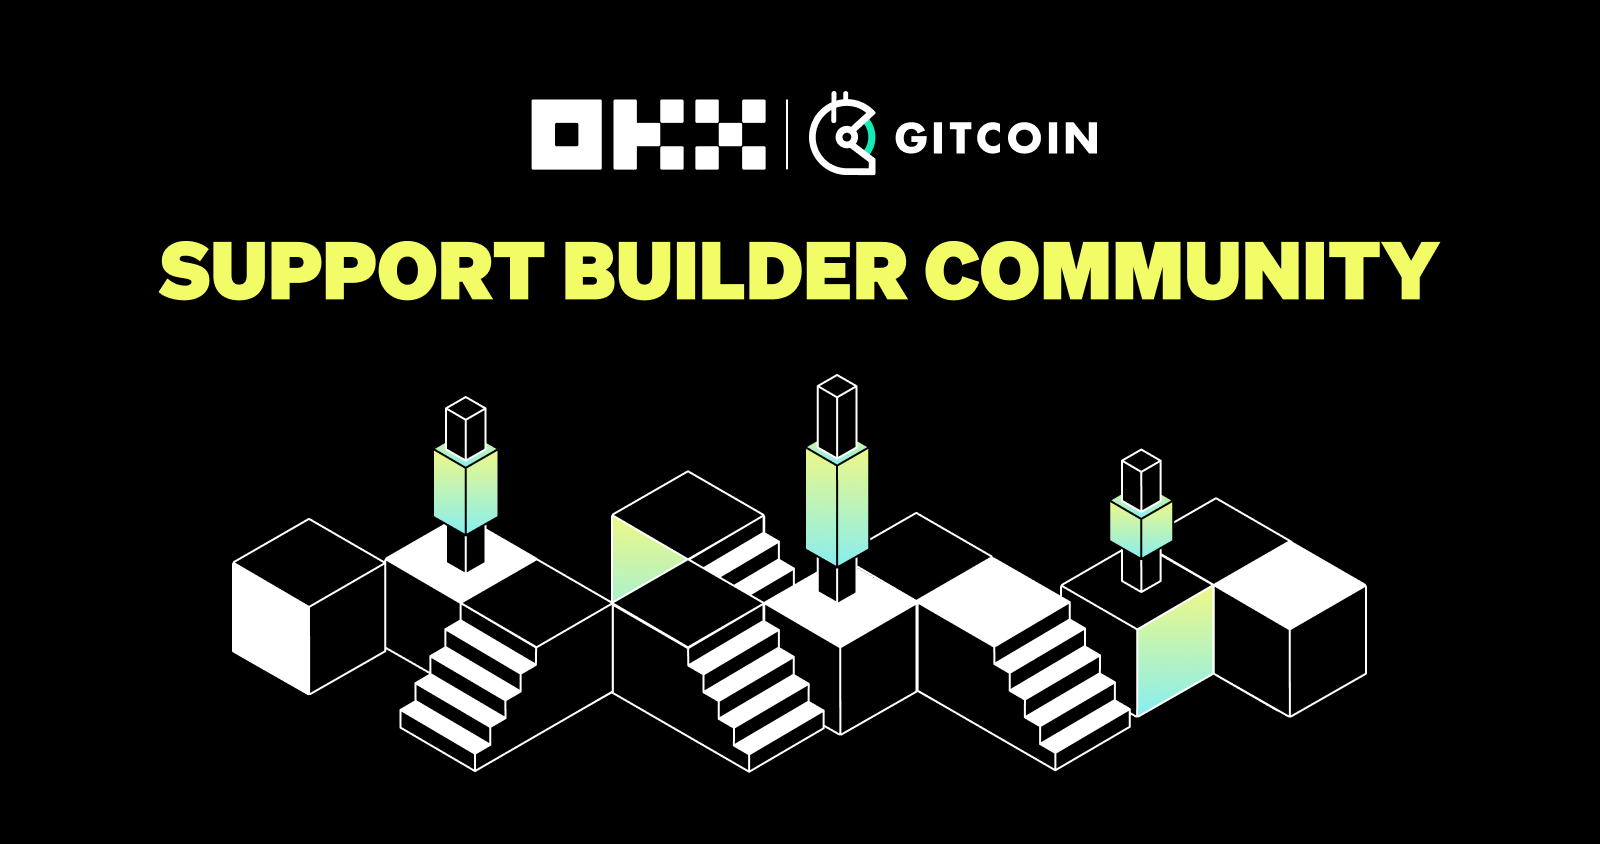 Gitcoin and OKX to Partner on Support Developer Community and Public Goods